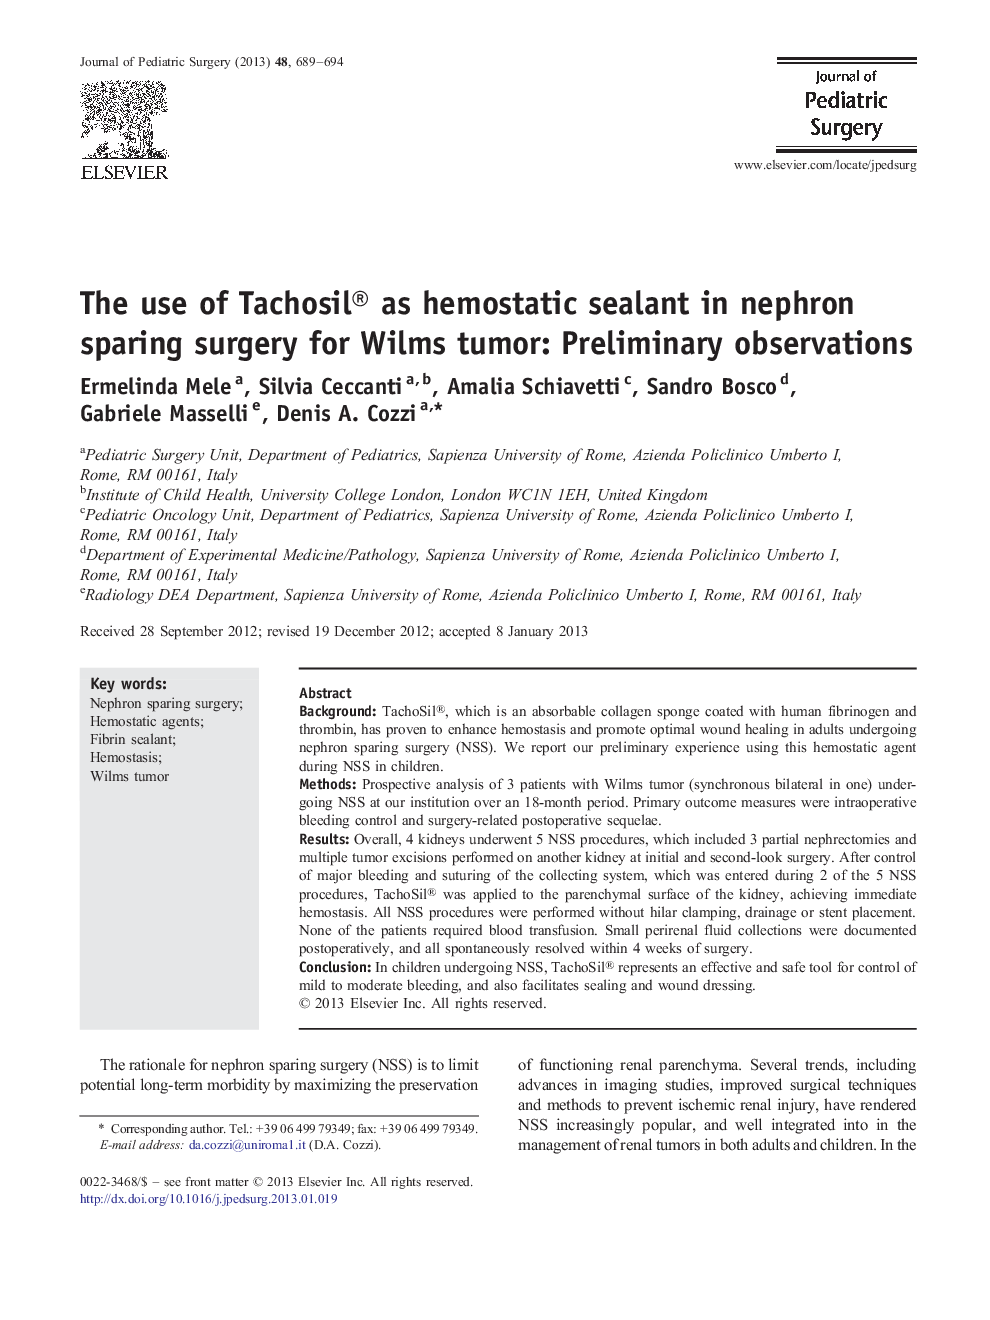 The use of Tachosil® as hemostatic sealant in nephron sparing surgery for Wilms tumor: Preliminary observations